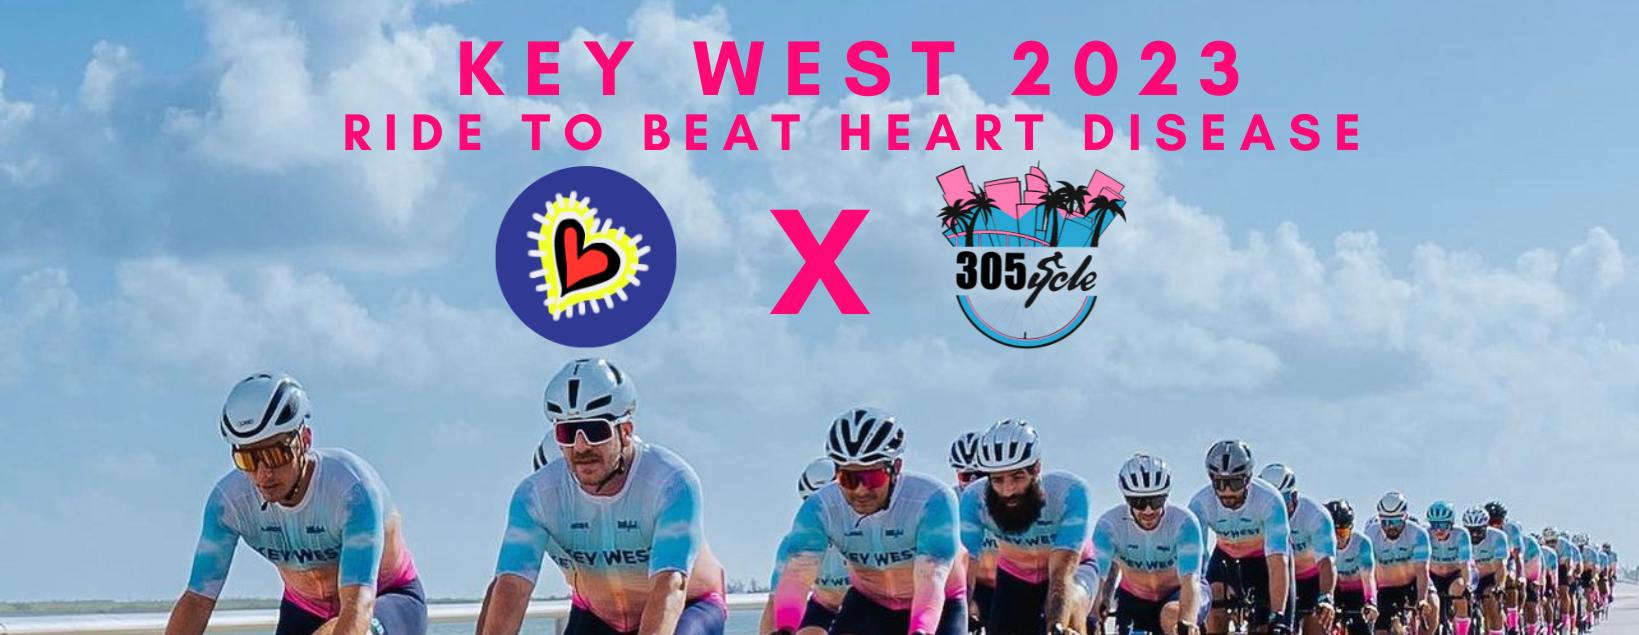 Ride to Key West 2023: Ride to Beat Heart Disease